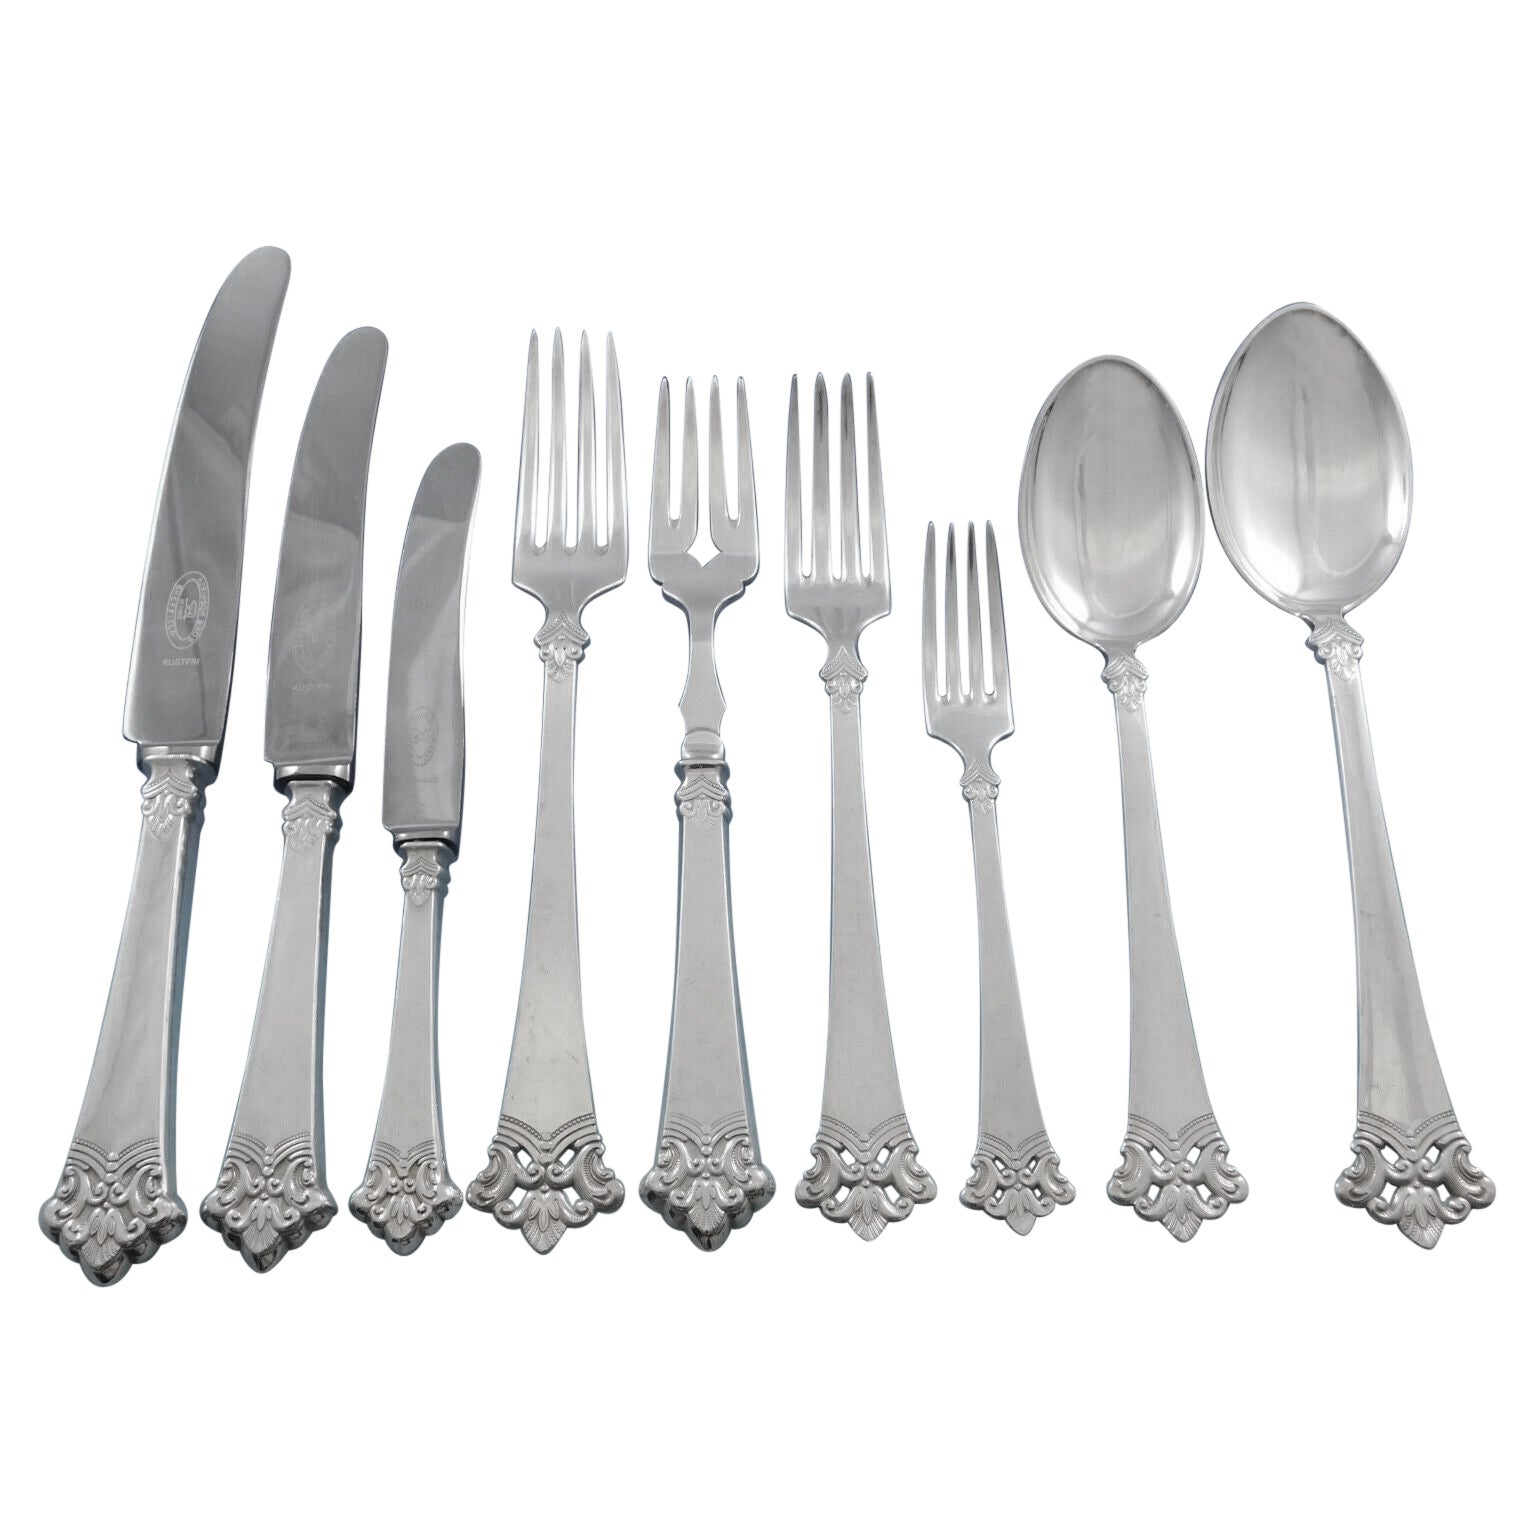 Anitra by Th. Olsens 830 Silver Flatware Set Service 109 Pieces Norwegian Modern